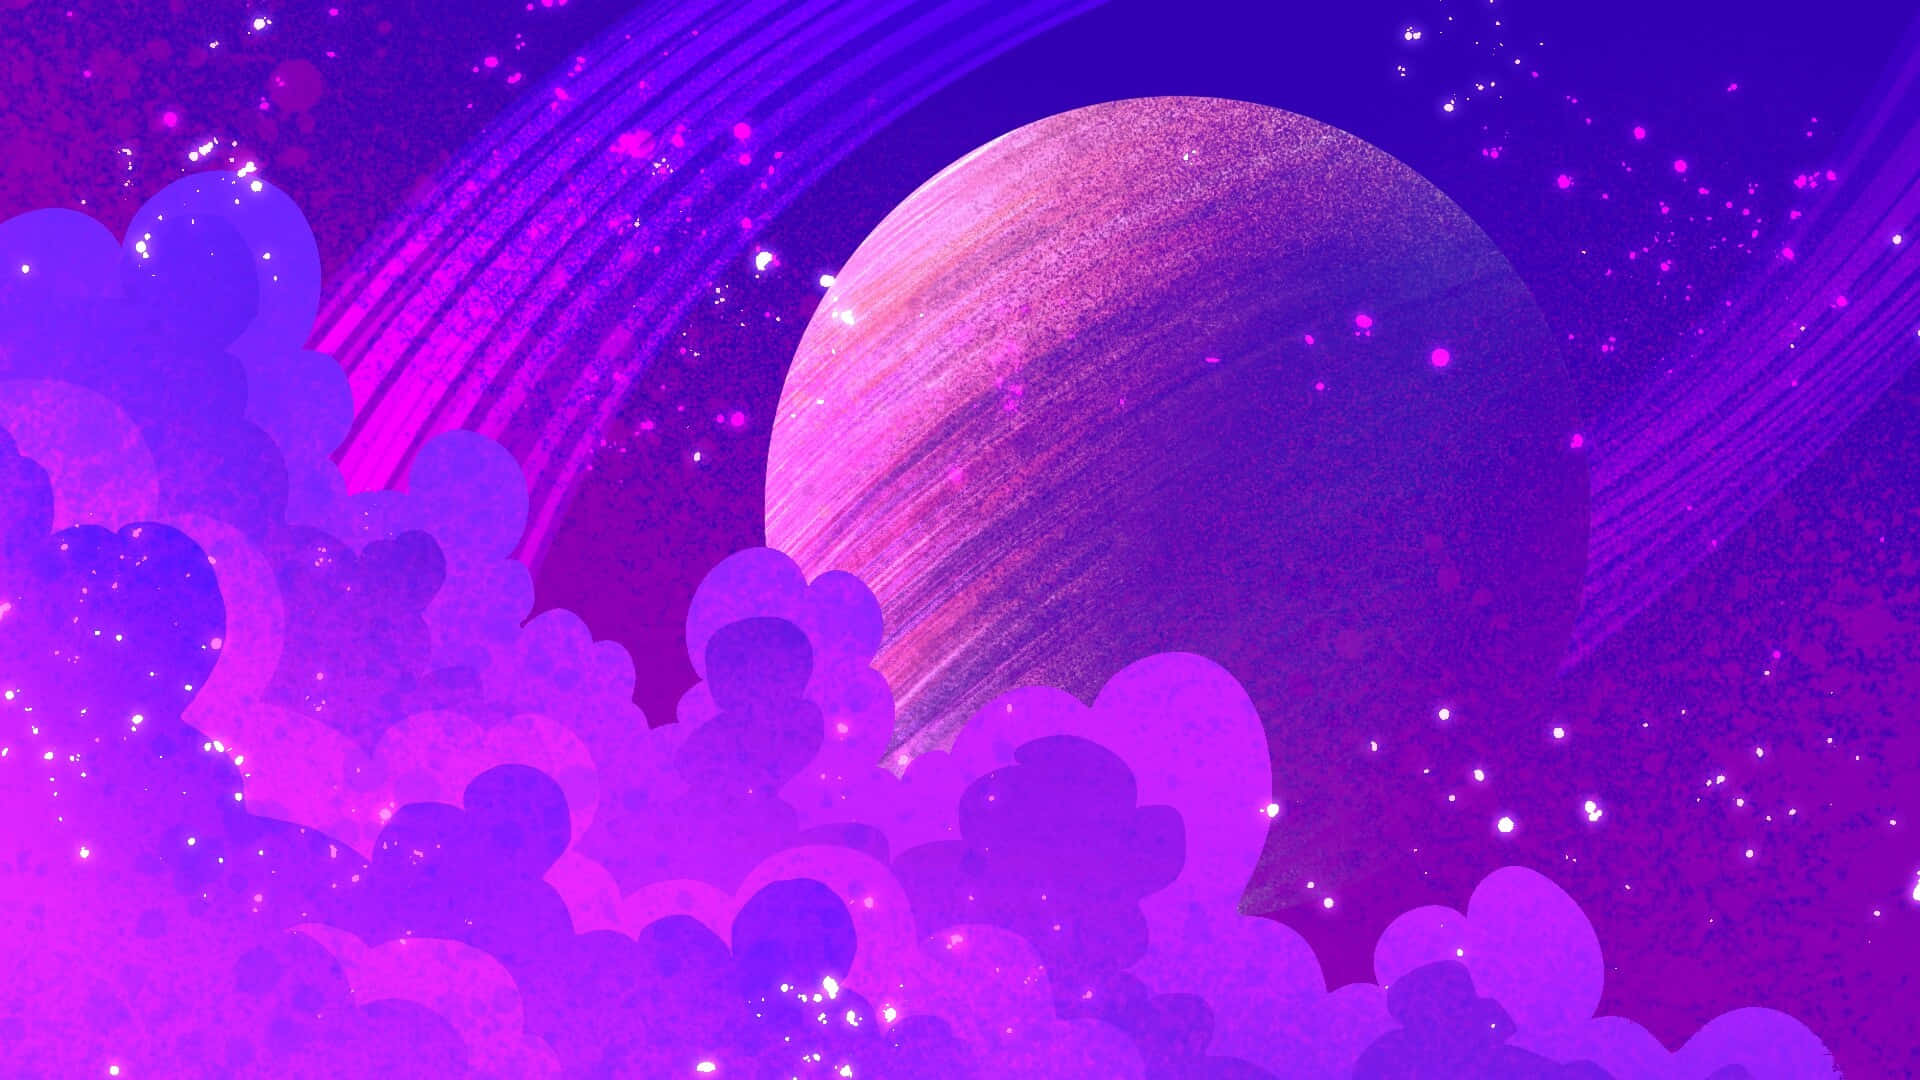 Animated Space Wallpaper